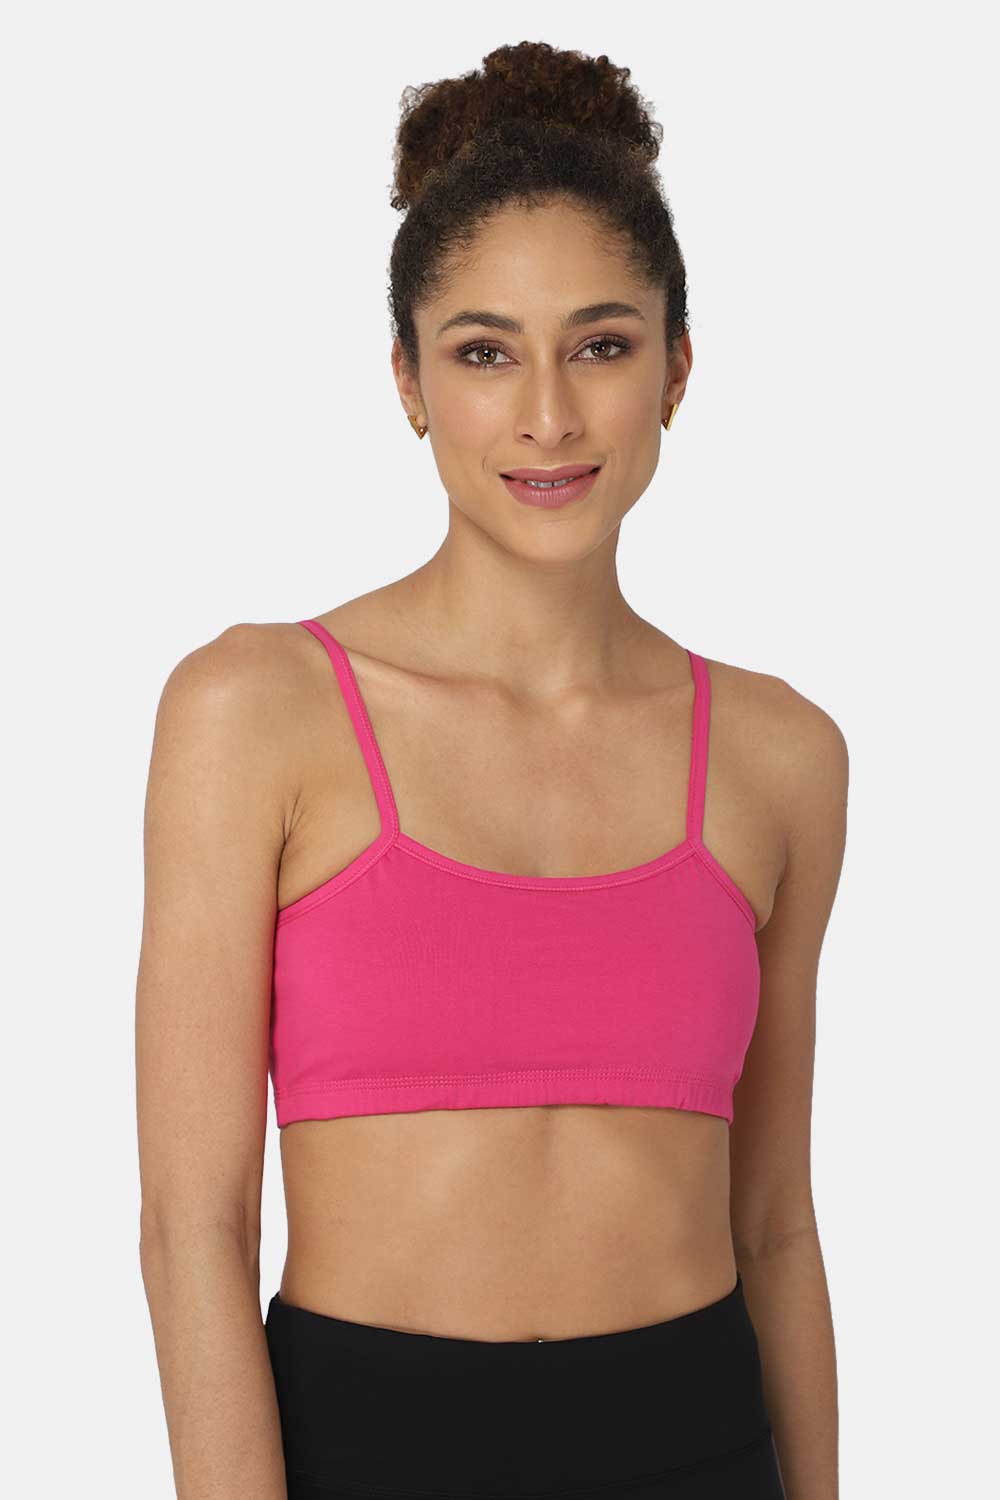 NWT INC International Concepts Wire Free Lace Bralette Jazzy PinkSize  Medium - Simpson Advanced Chiropractic & Medical Center